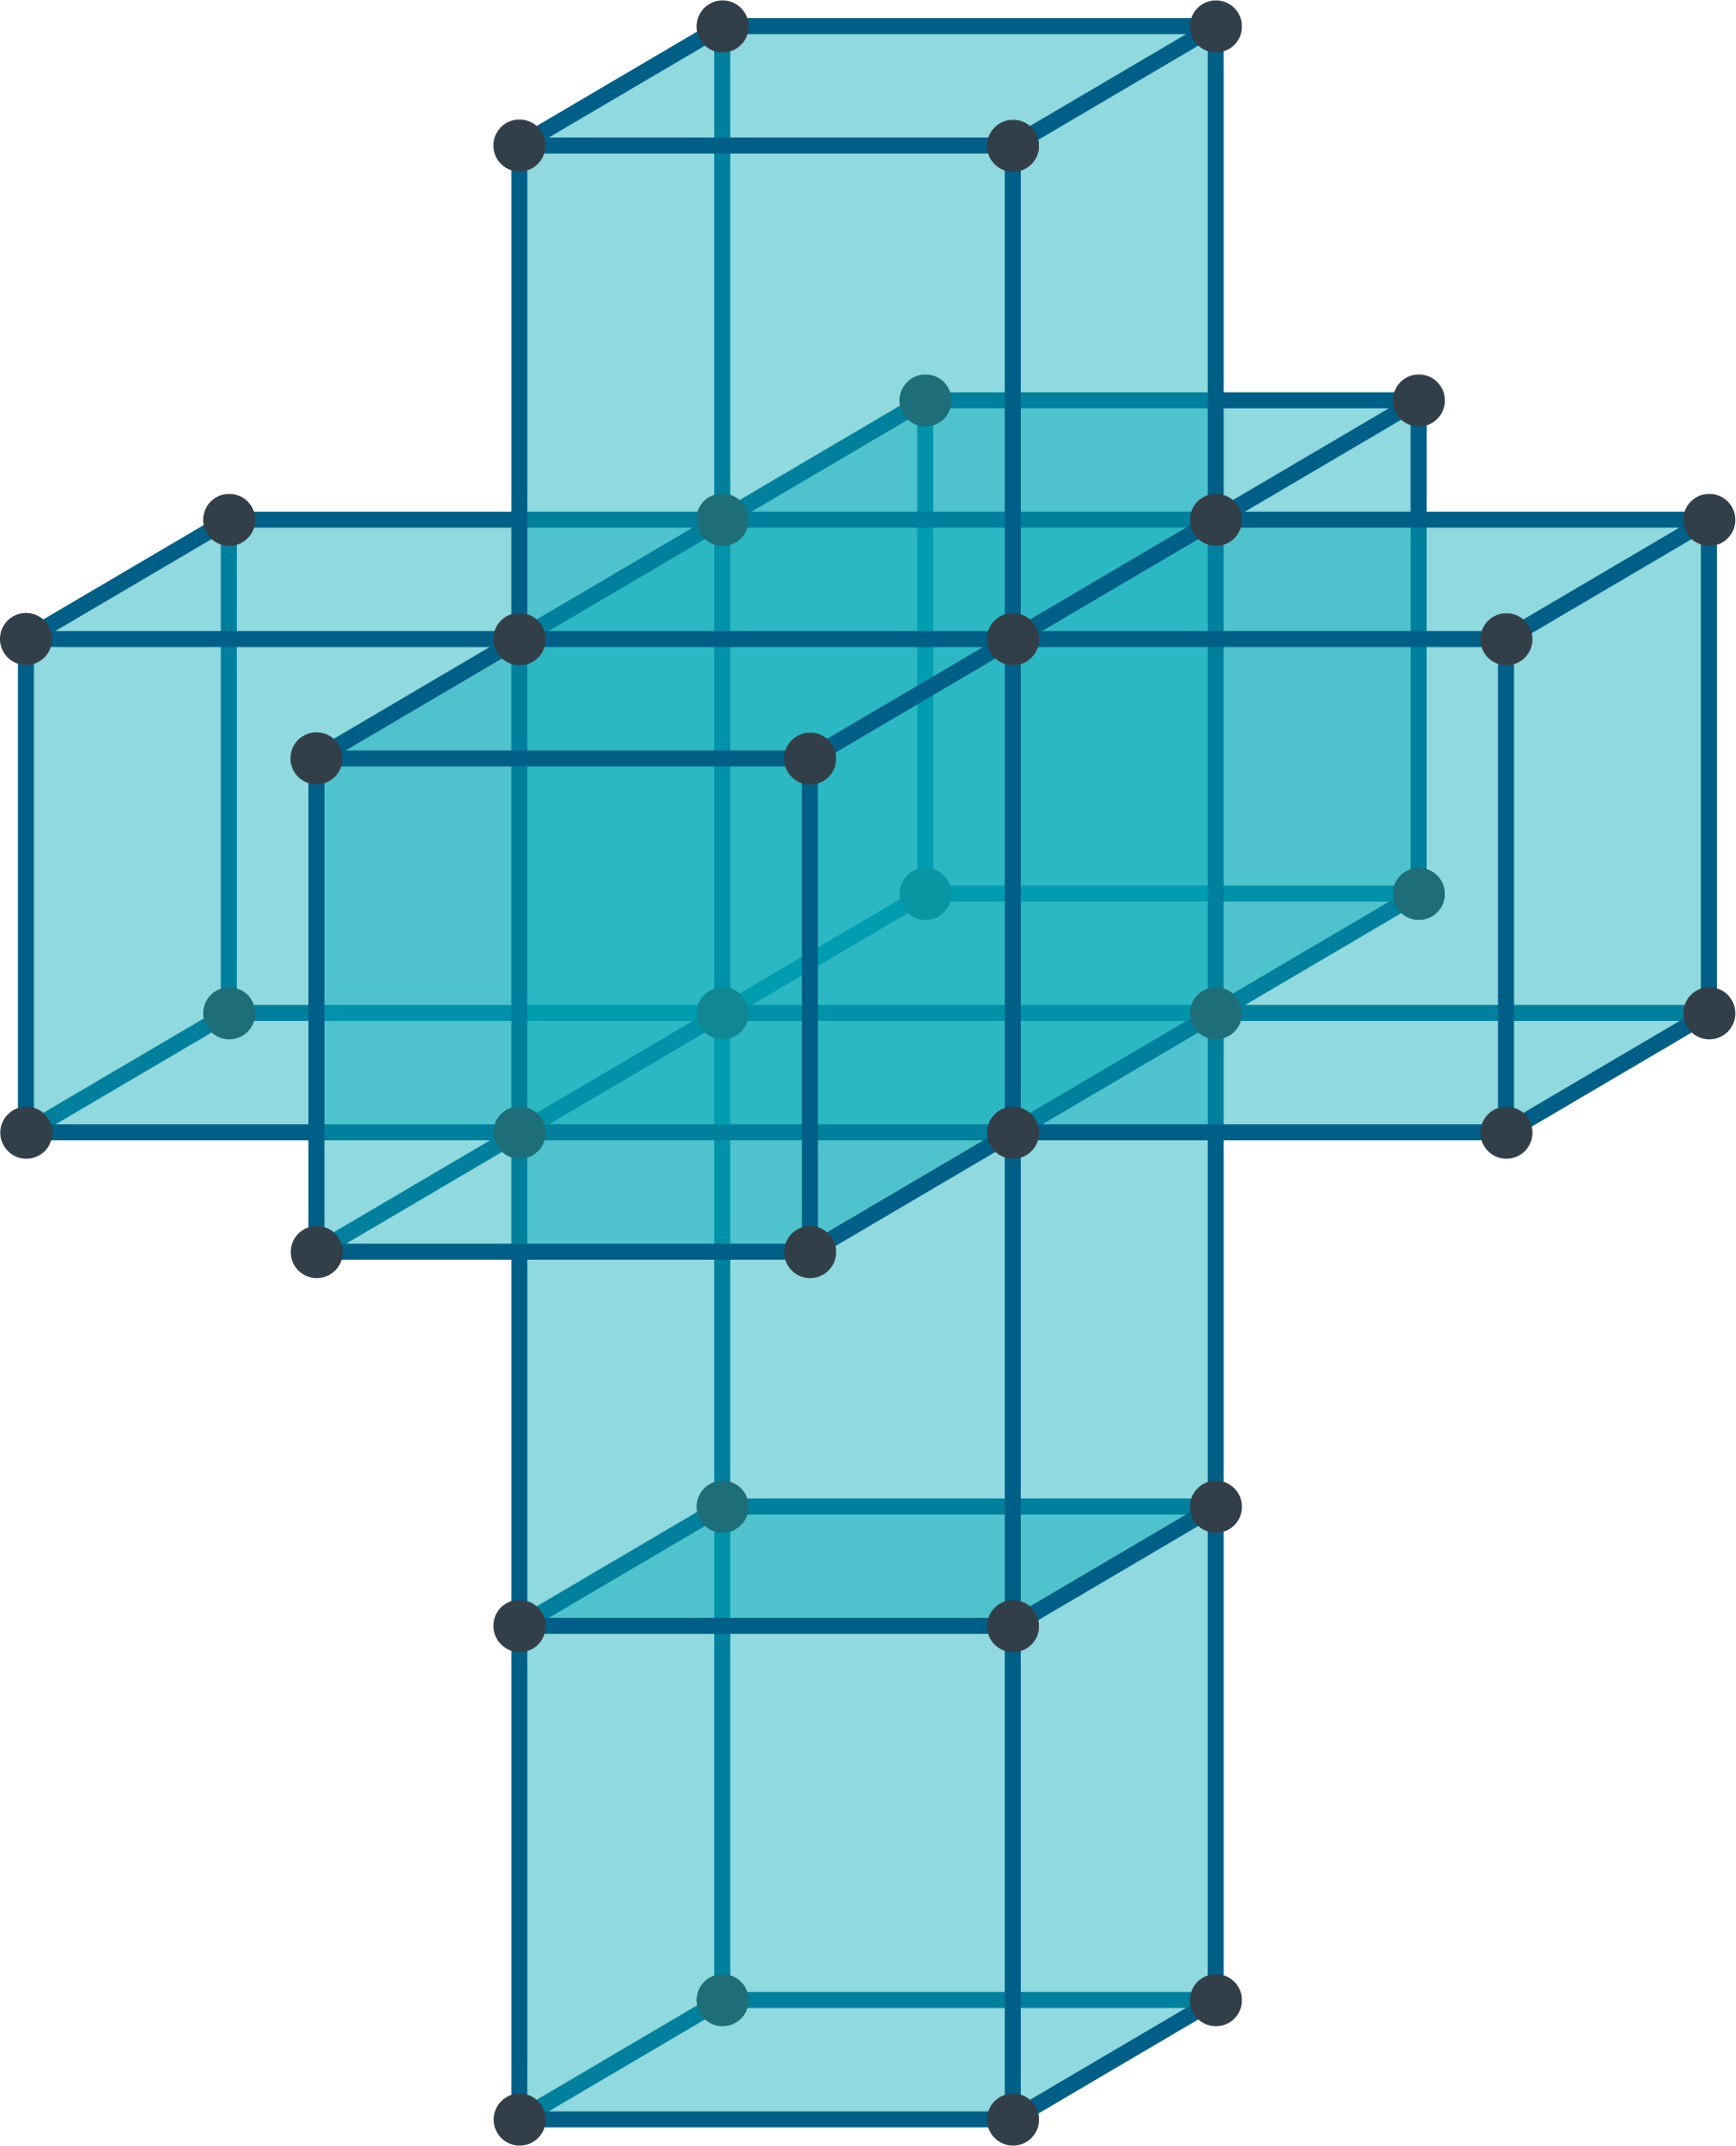 Set of eight 3D cubes connected together. Four are arranged in a column, and then four more are joined to the exposed faces of the second cube from the top.